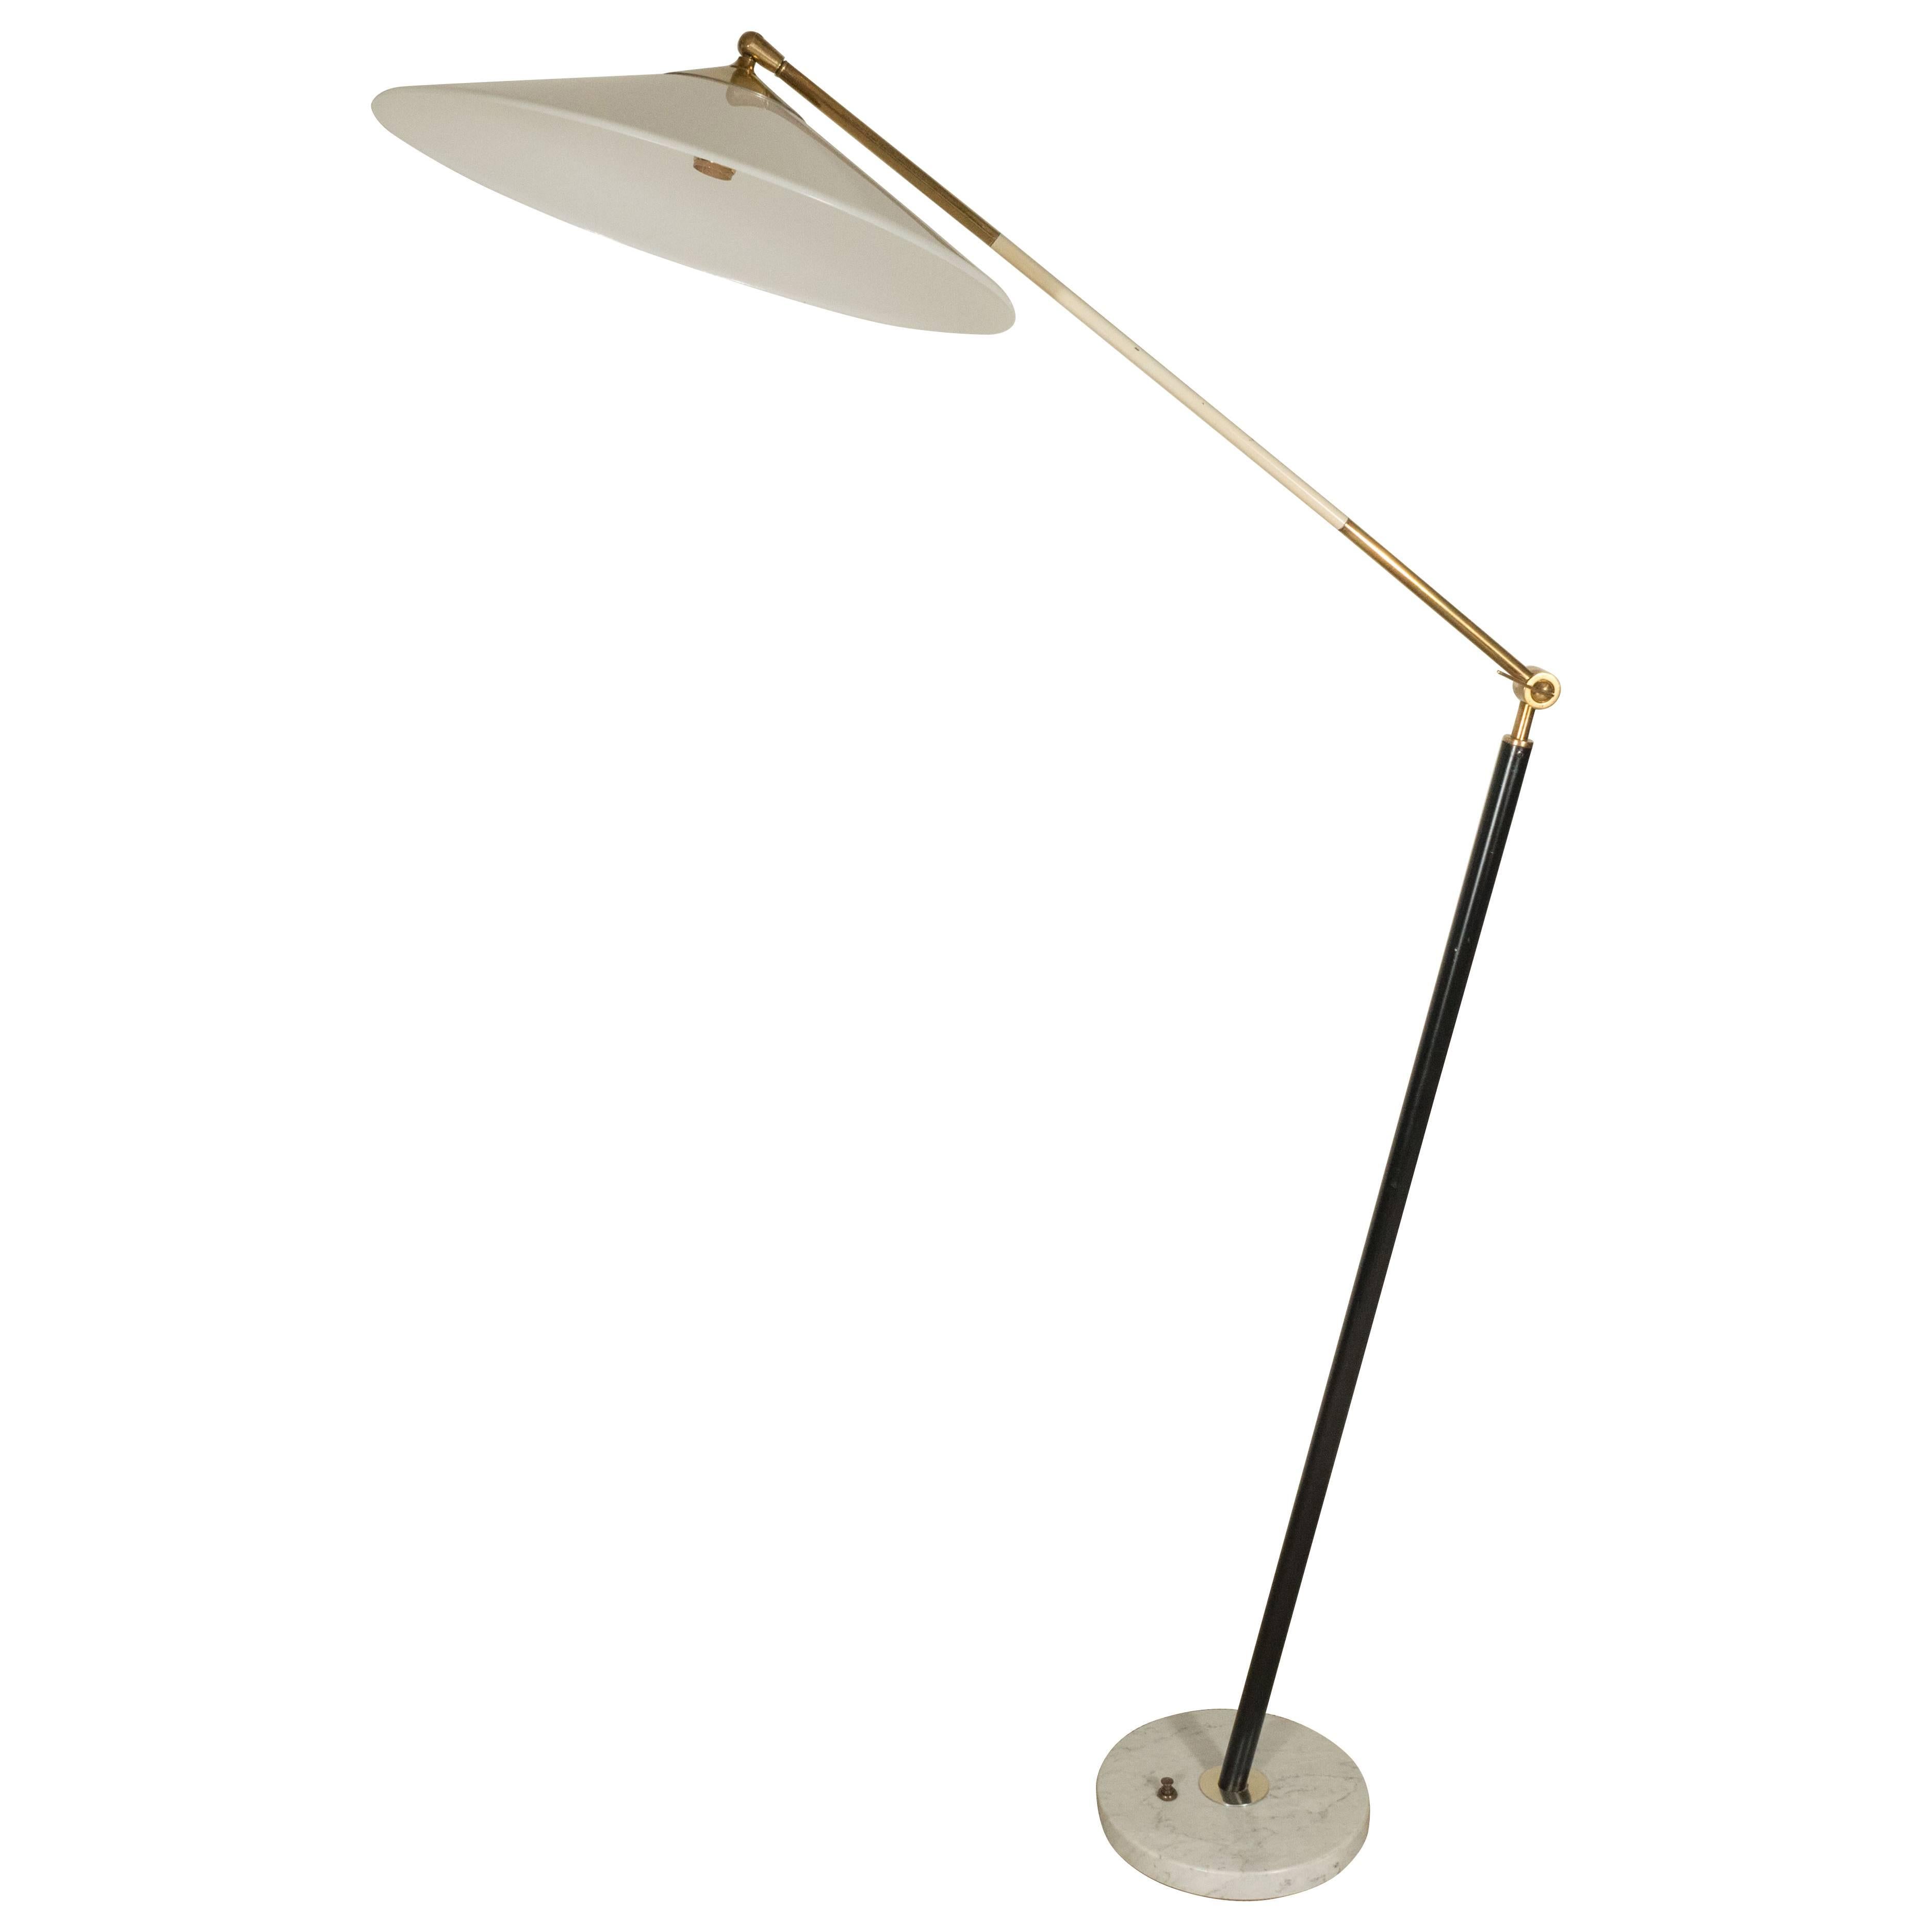 Stilux floor lamp with white plastic shade, Italy.